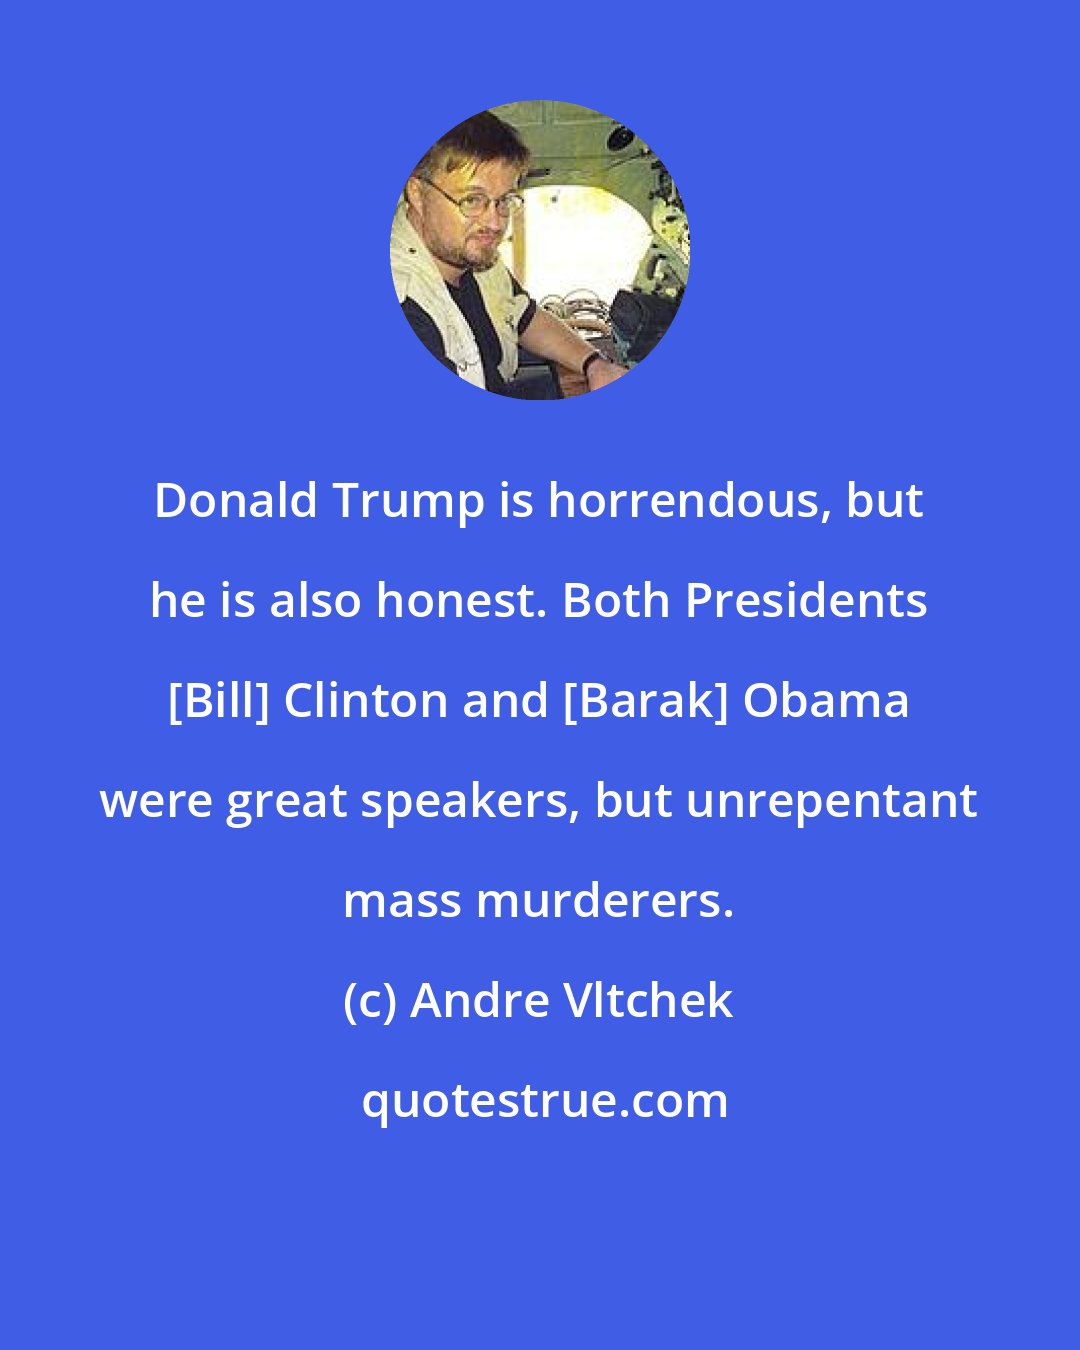 Andre Vltchek: Donald Trump is horrendous, but he is also honest. Both Presidents [Bill] Clinton and [Barak] Obama were great speakers, but unrepentant mass murderers.